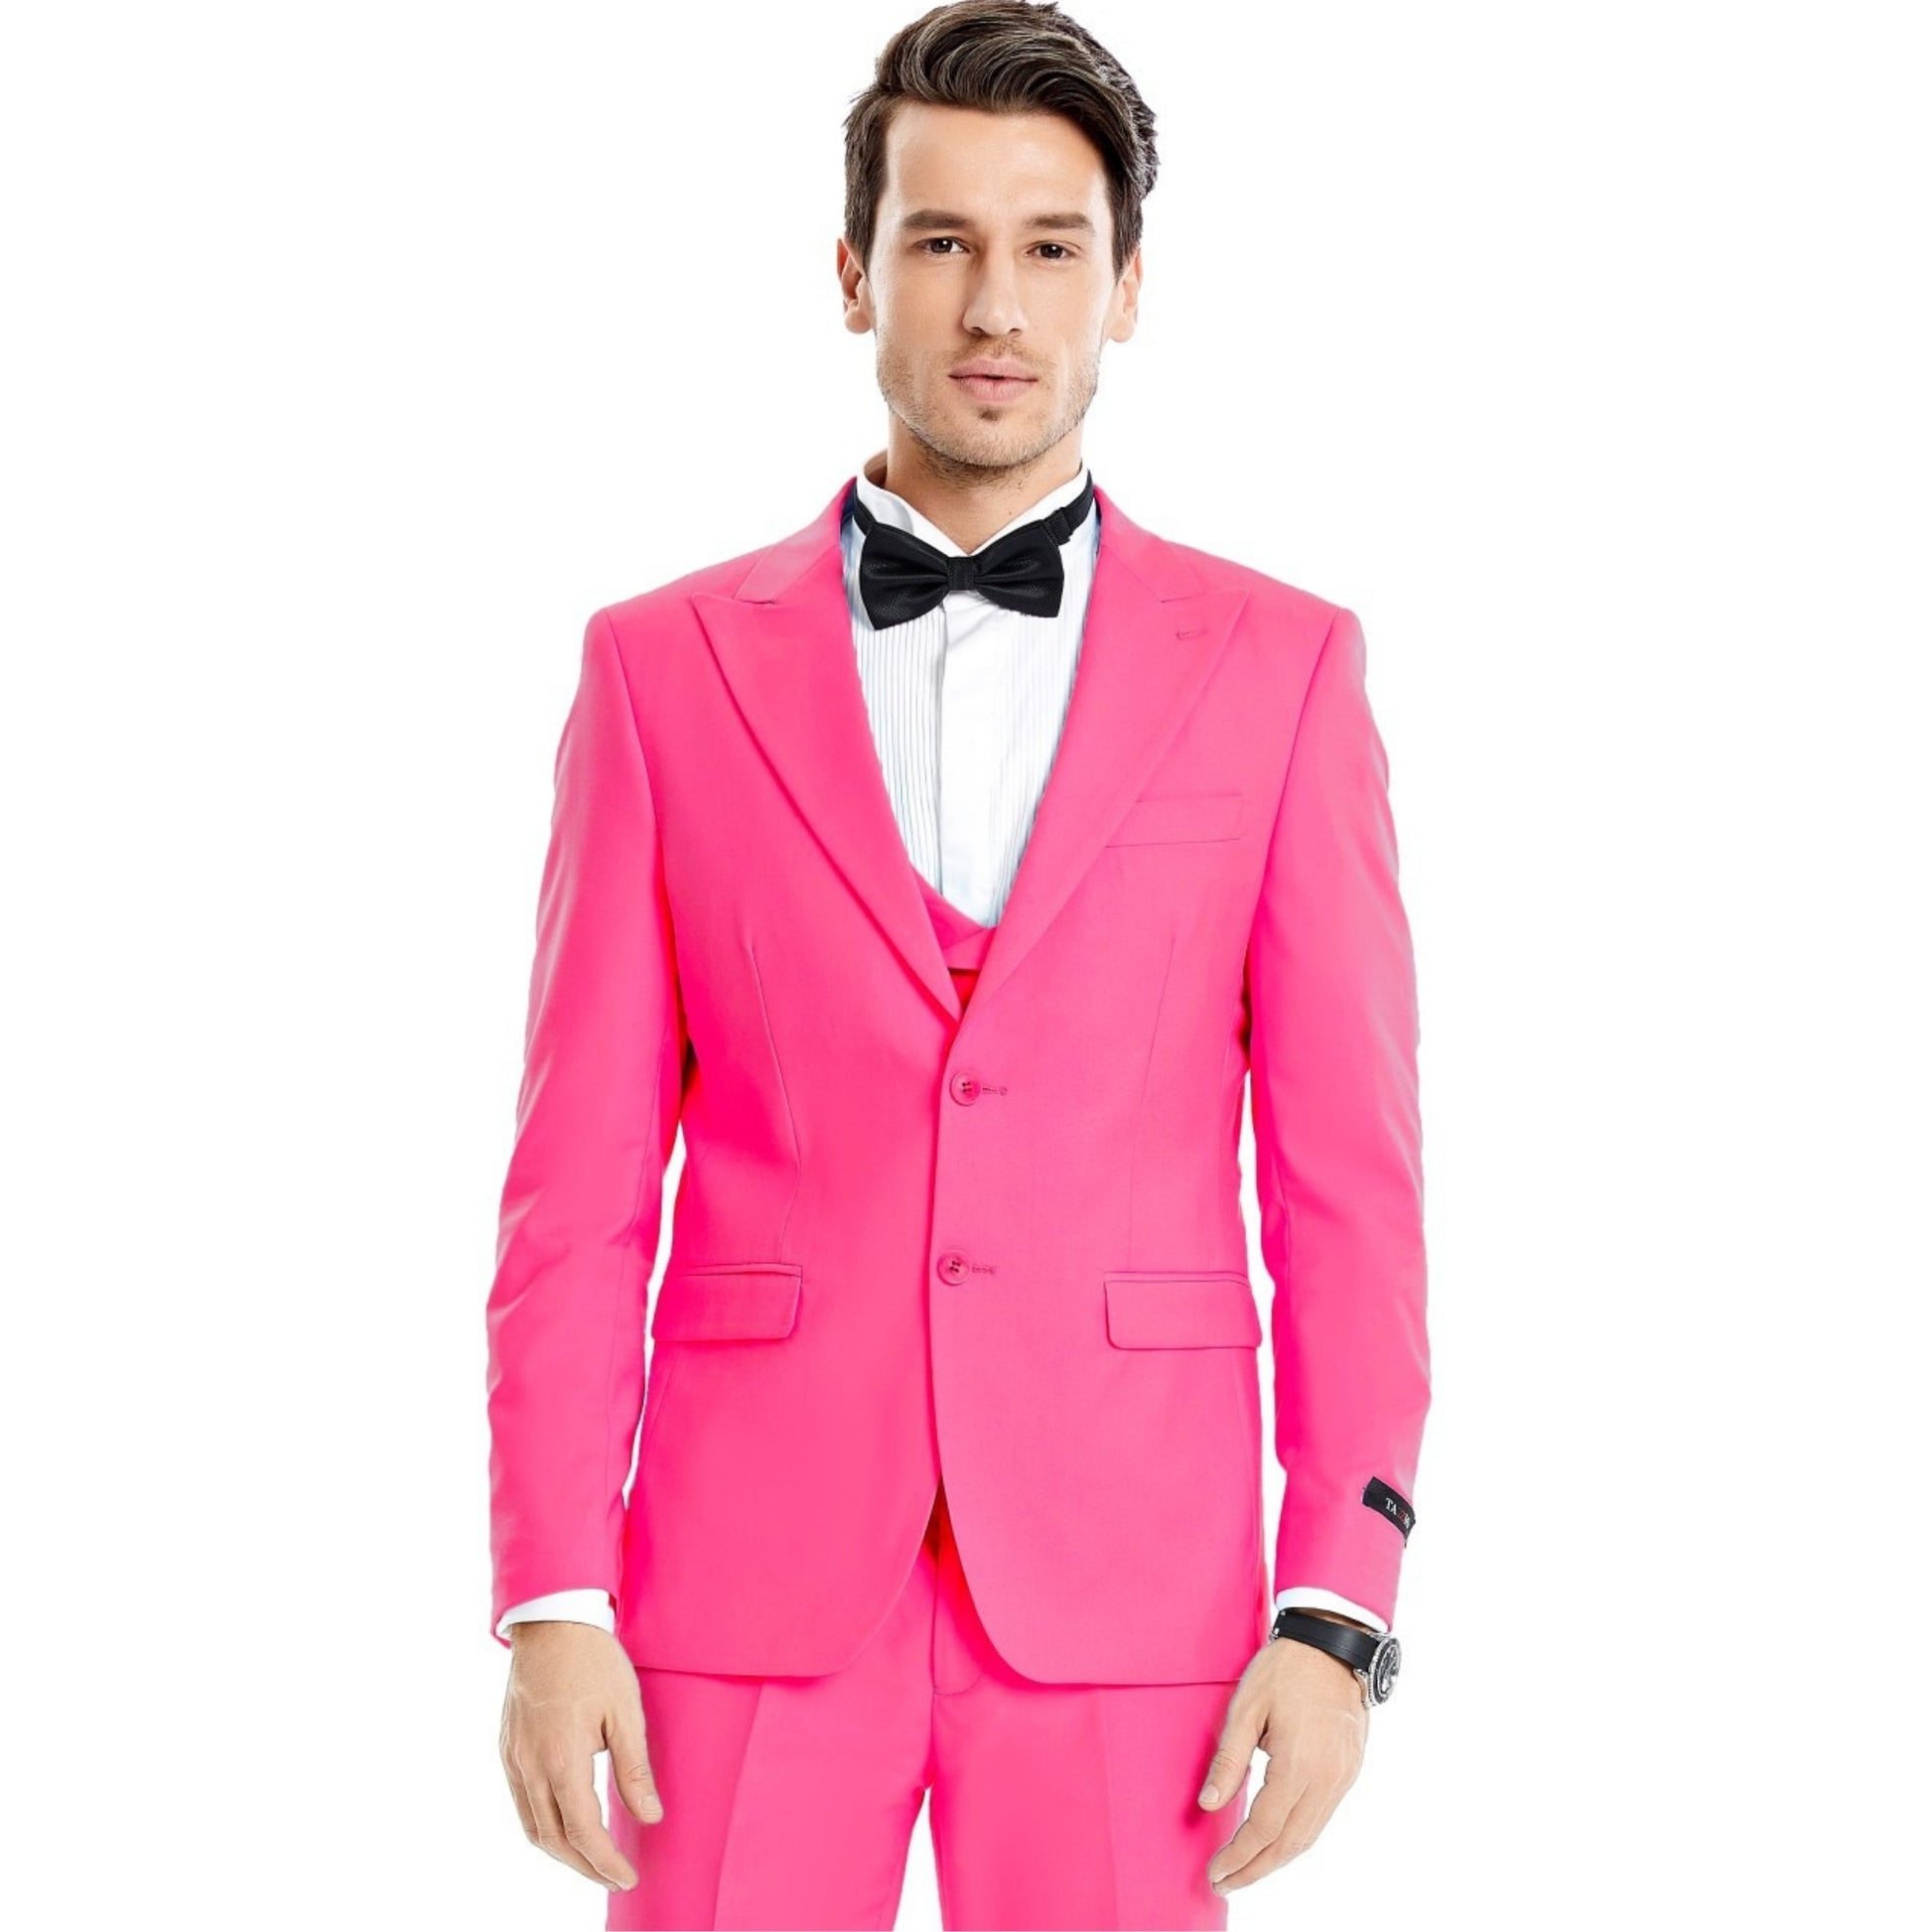 Dashing man in a full electric pink suit, the perfect prom ensemble."